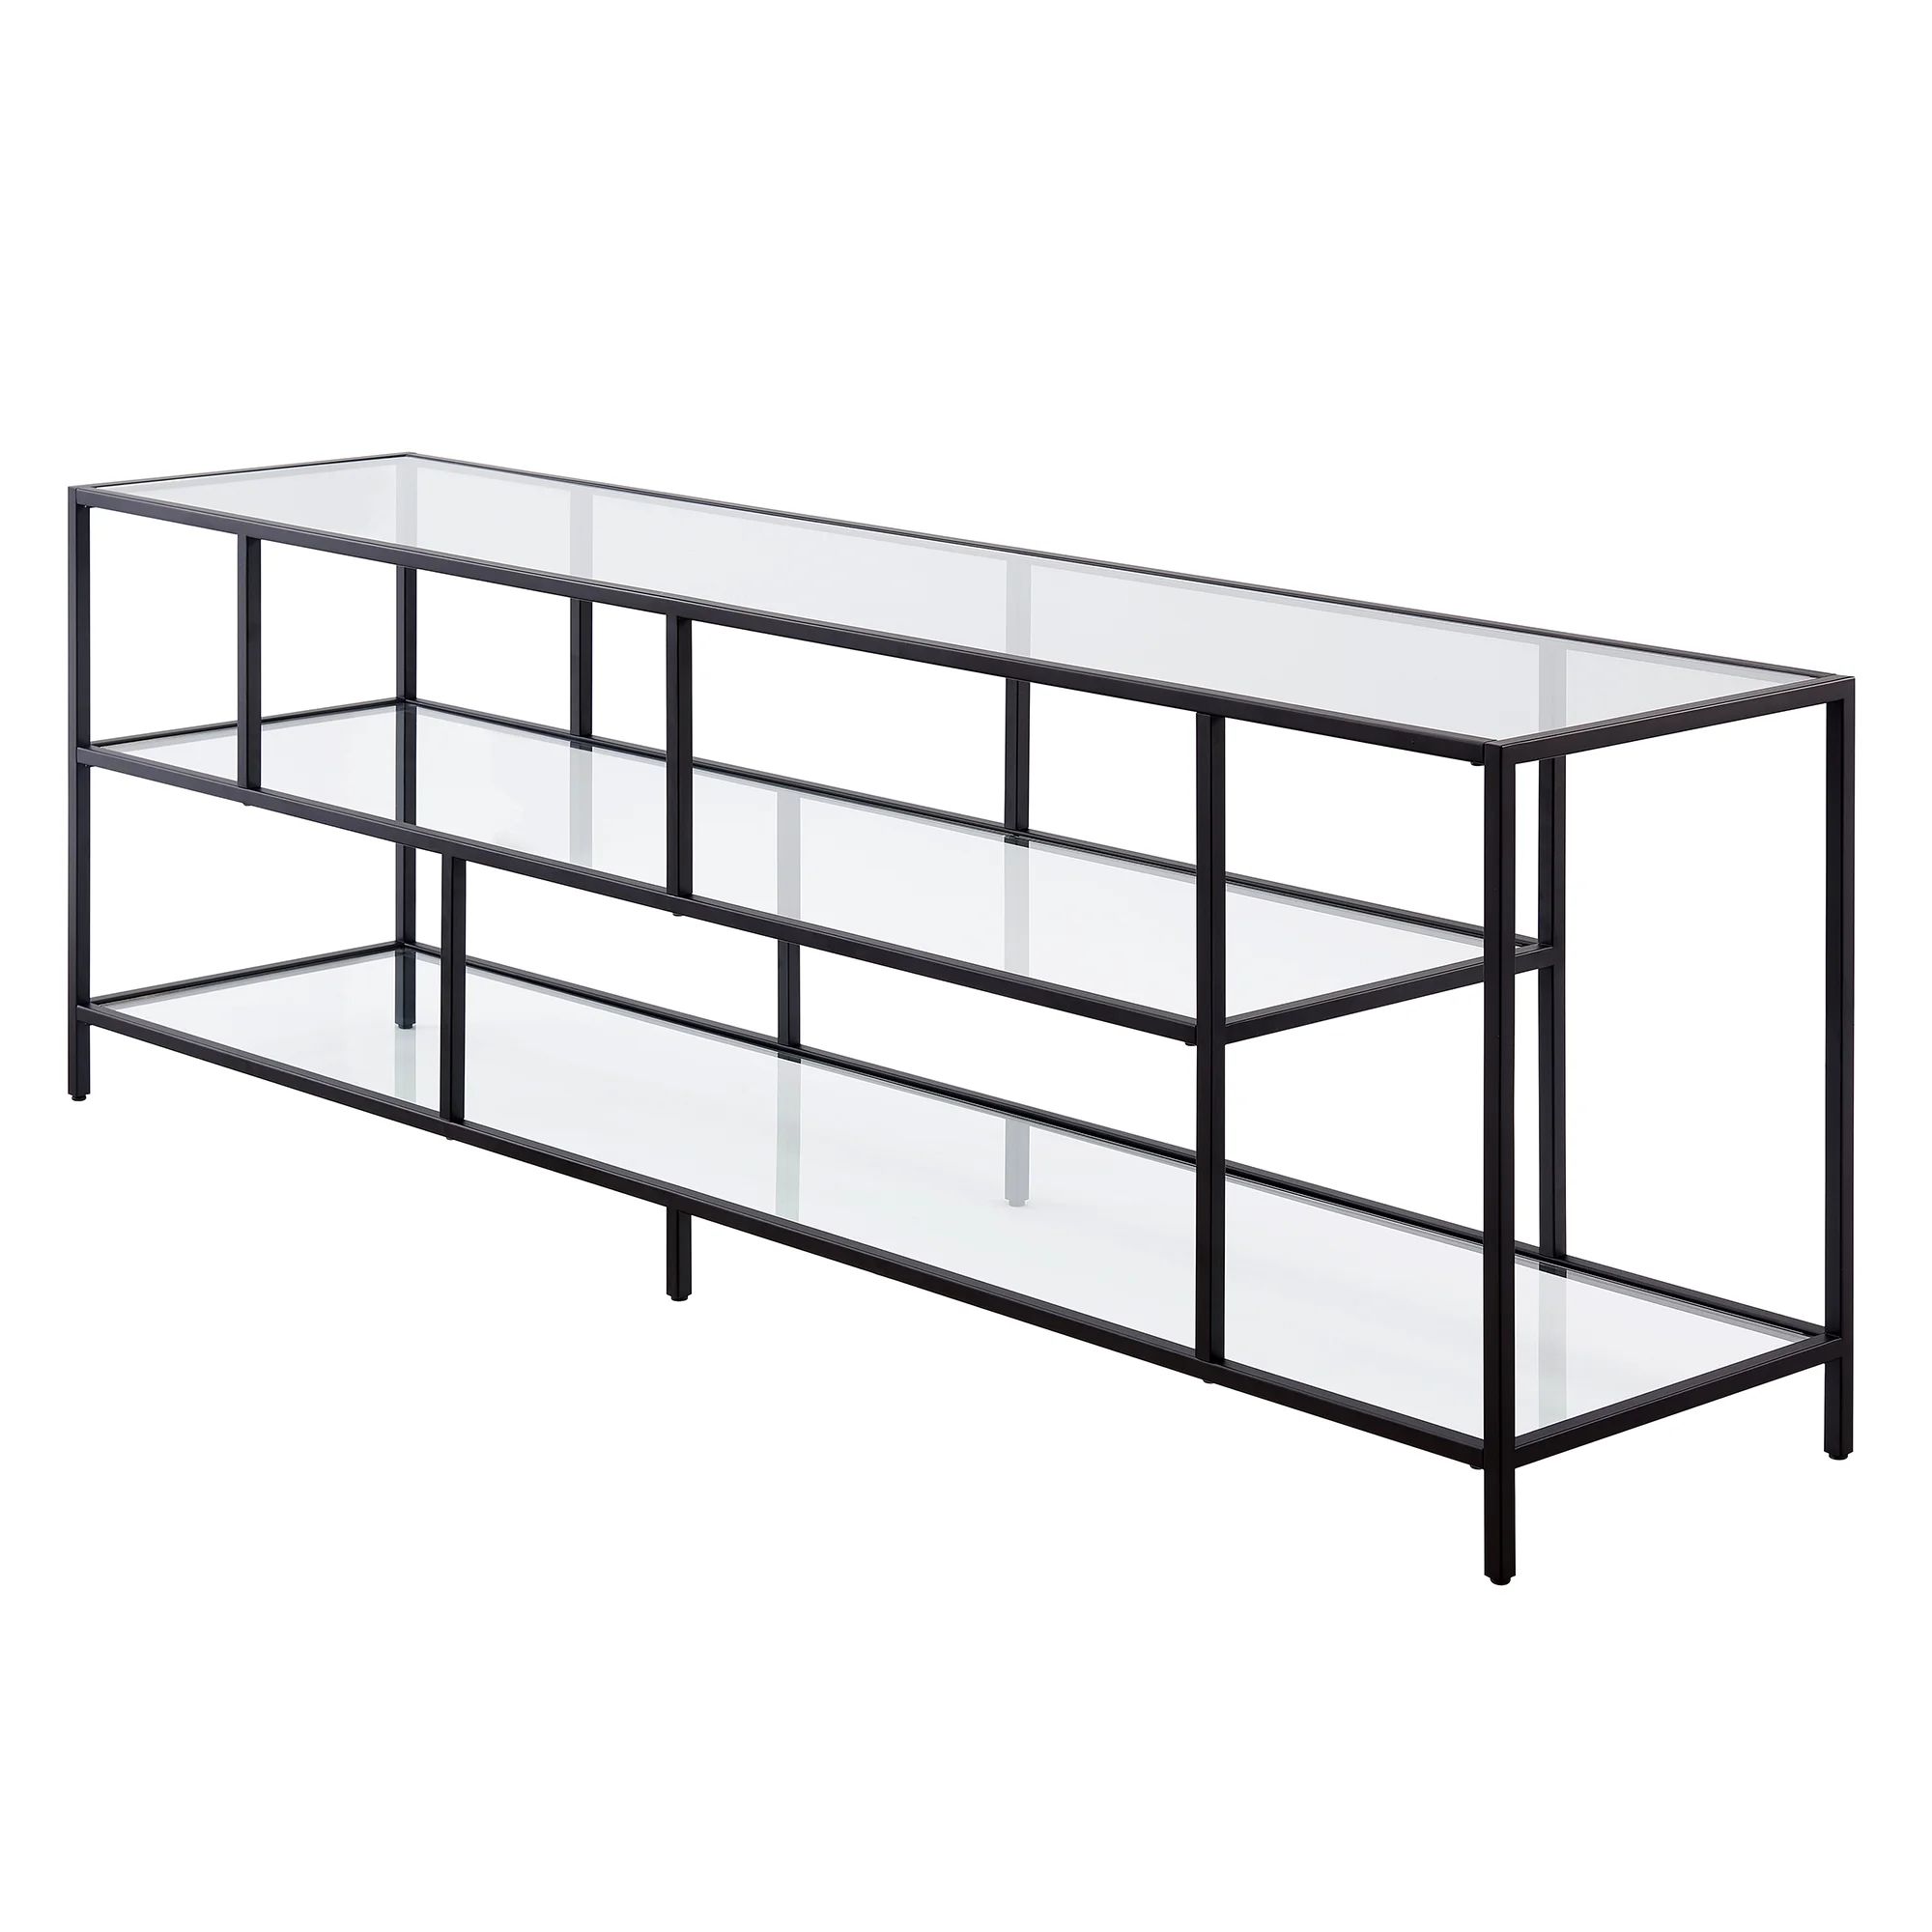 Wootton TV Stand for TVs up to 78" | Wayfair North America